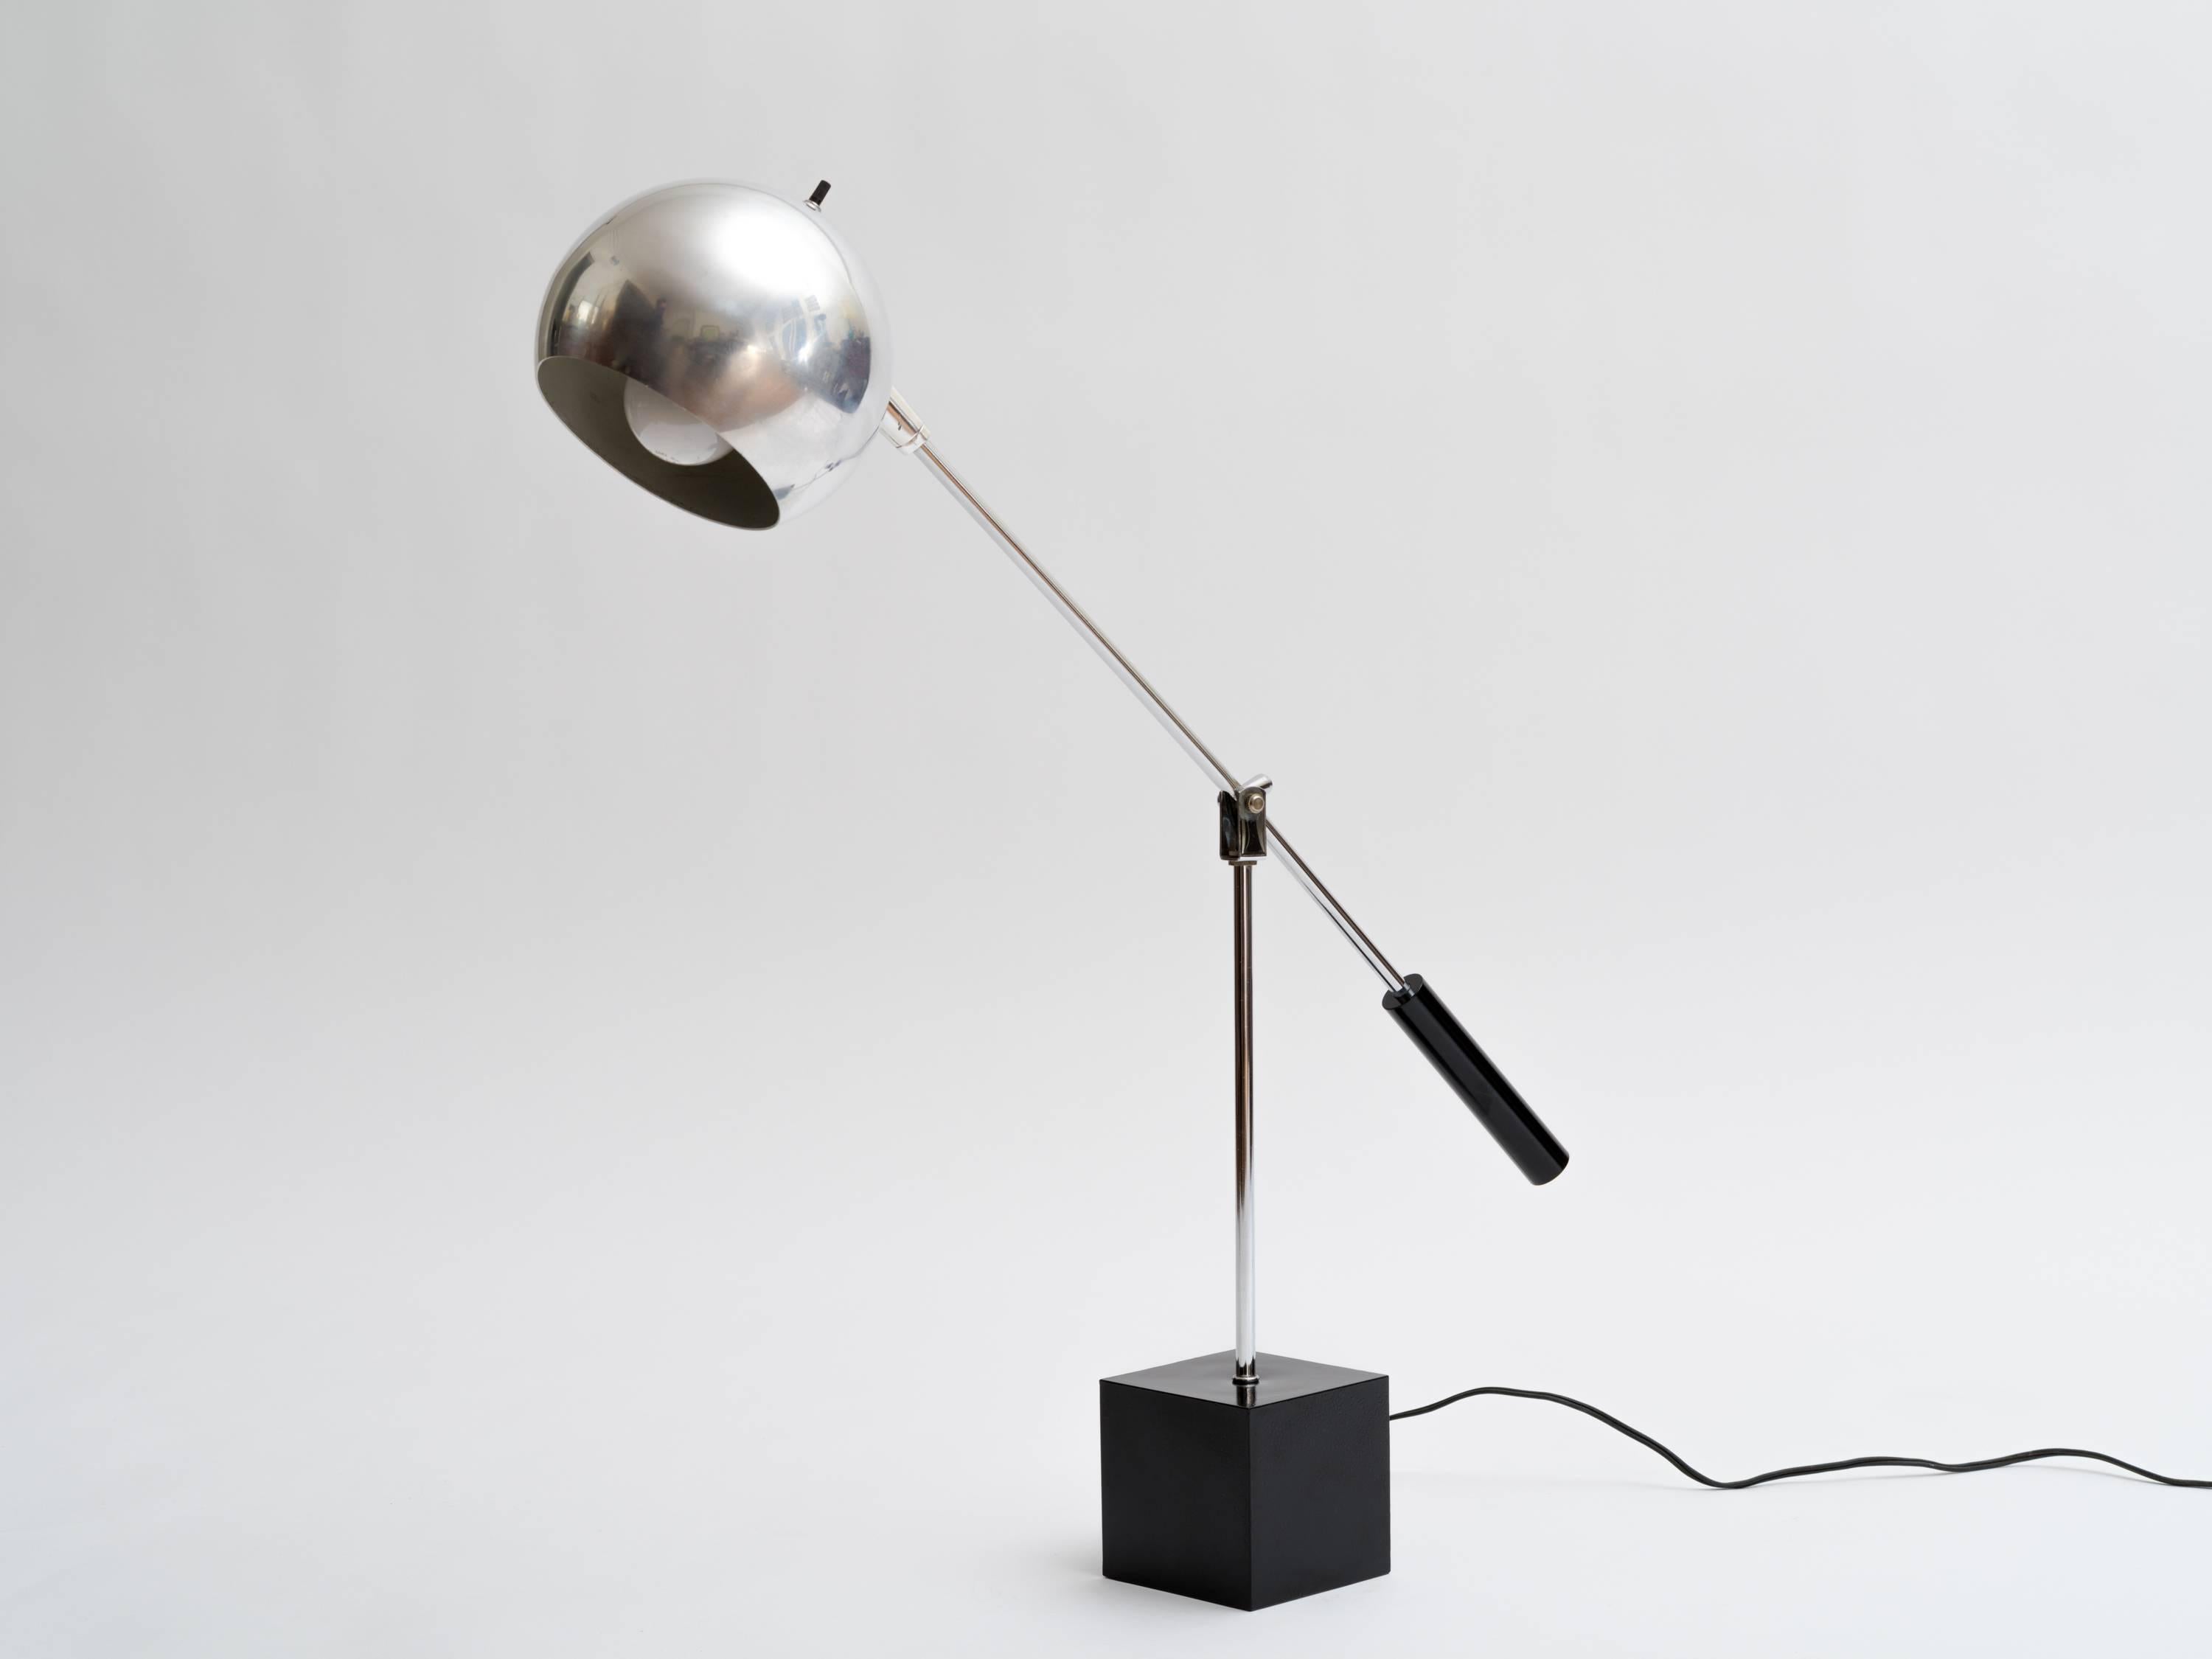 Adjustable 1970s chrome ball desk lamp on enameled metal cube base. Adjusts by height and enameled handle arm swivels giving many degrees of directional lighting.